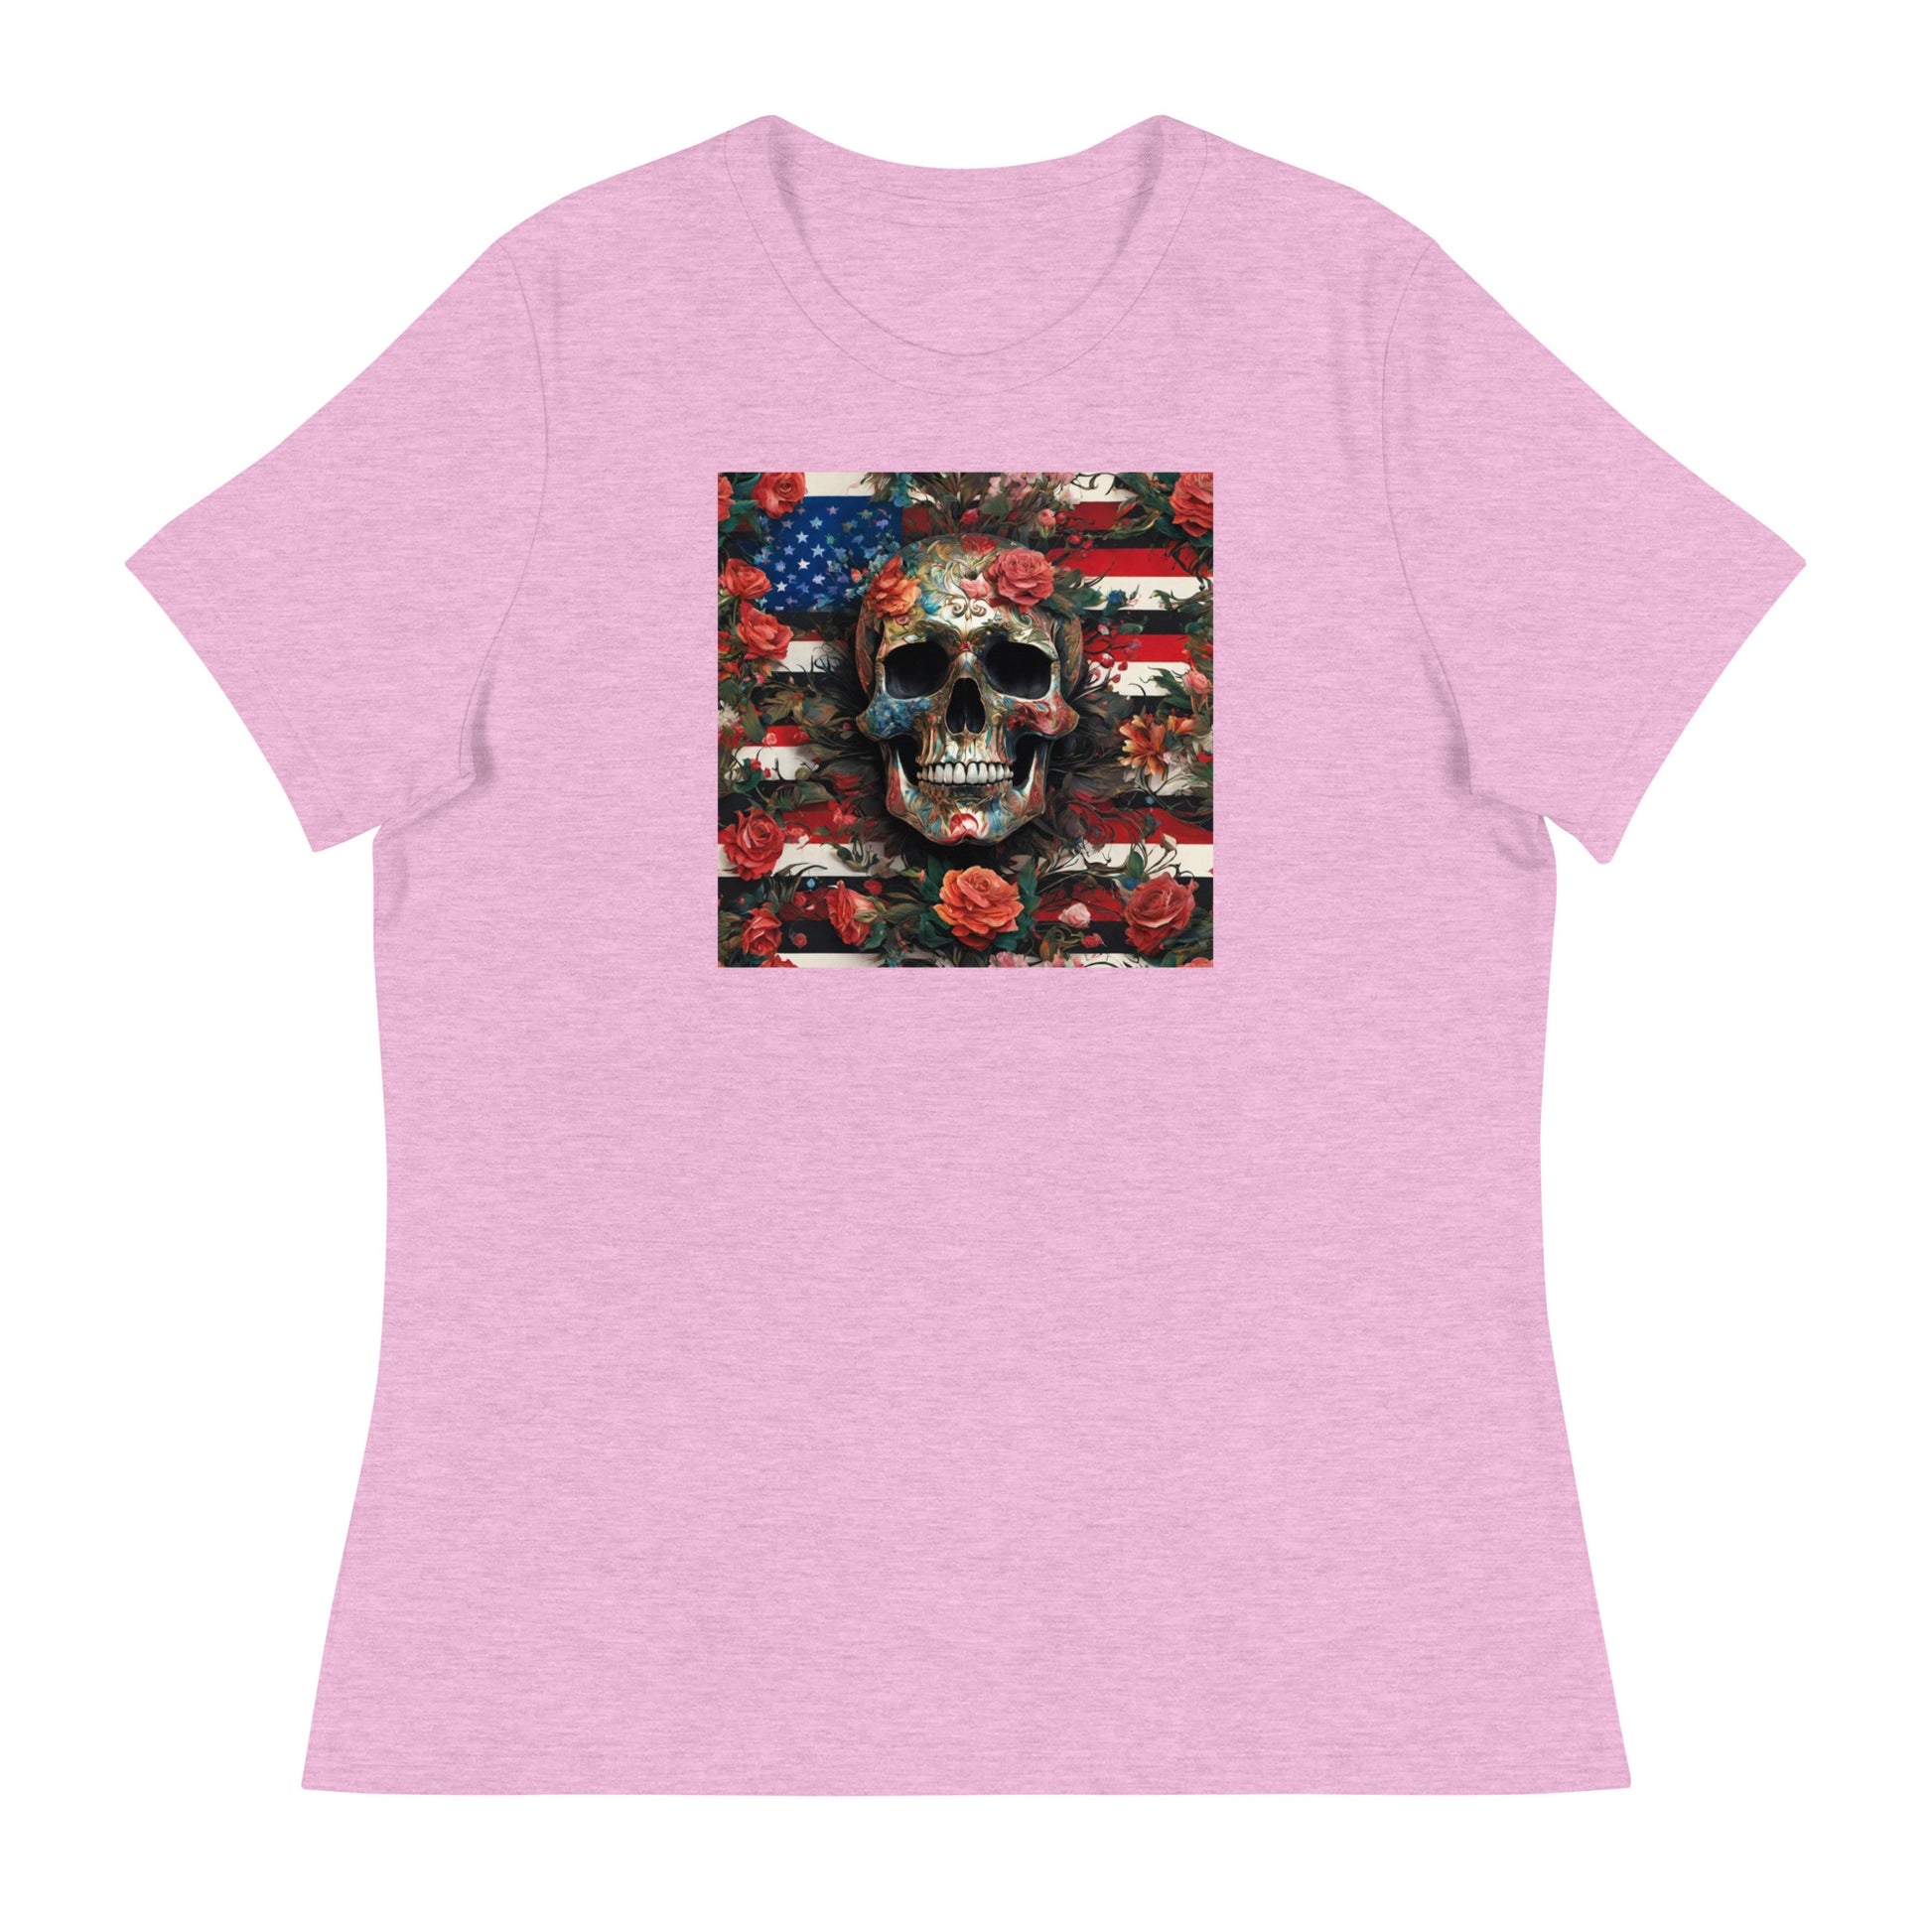 Skull, Roses, and Flag Women's Graphic T-Shirt Heather Prism Lilac